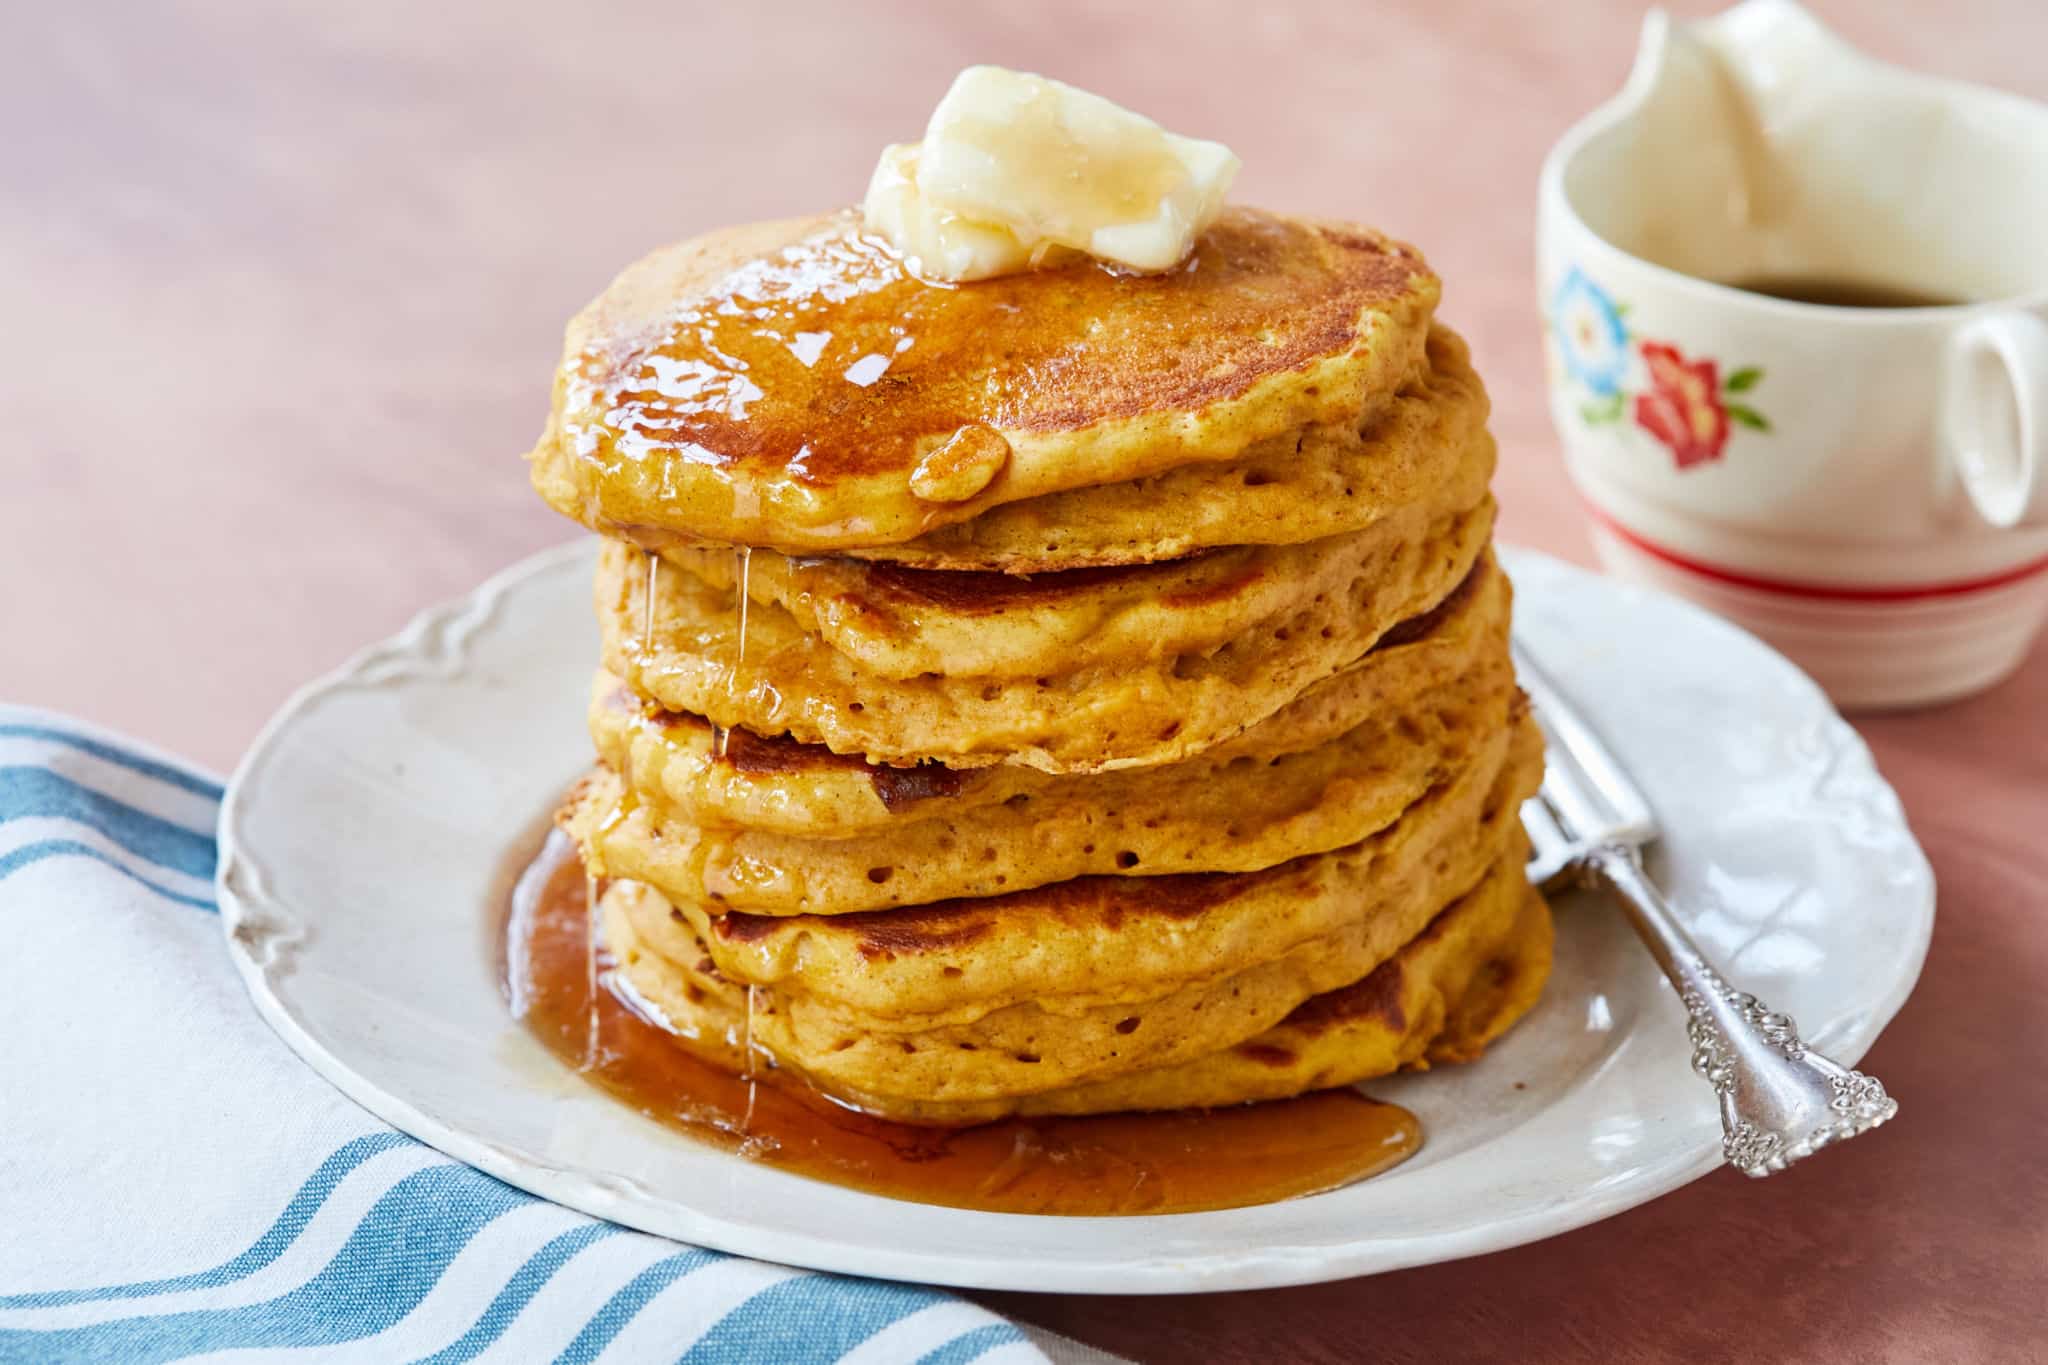 A stack of pumpkin pancakes topped with butter and syrup.